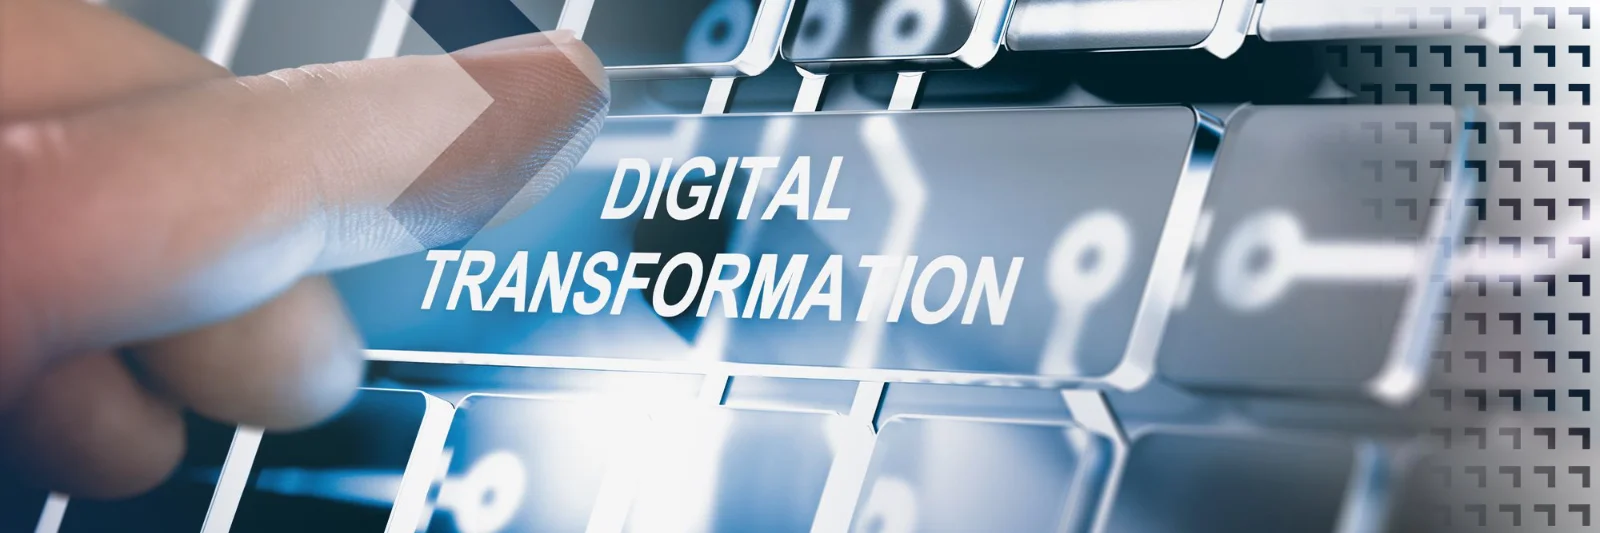 GFT&#039;s article emphasizes that digital transformation is not optional but essential for businesses to survive and thrive, particularly in the context of Mexico. It outlines the strategic necessity for companies to adopt digital technologies to stay competitive and relevant in the rapidly evolving digital landscape